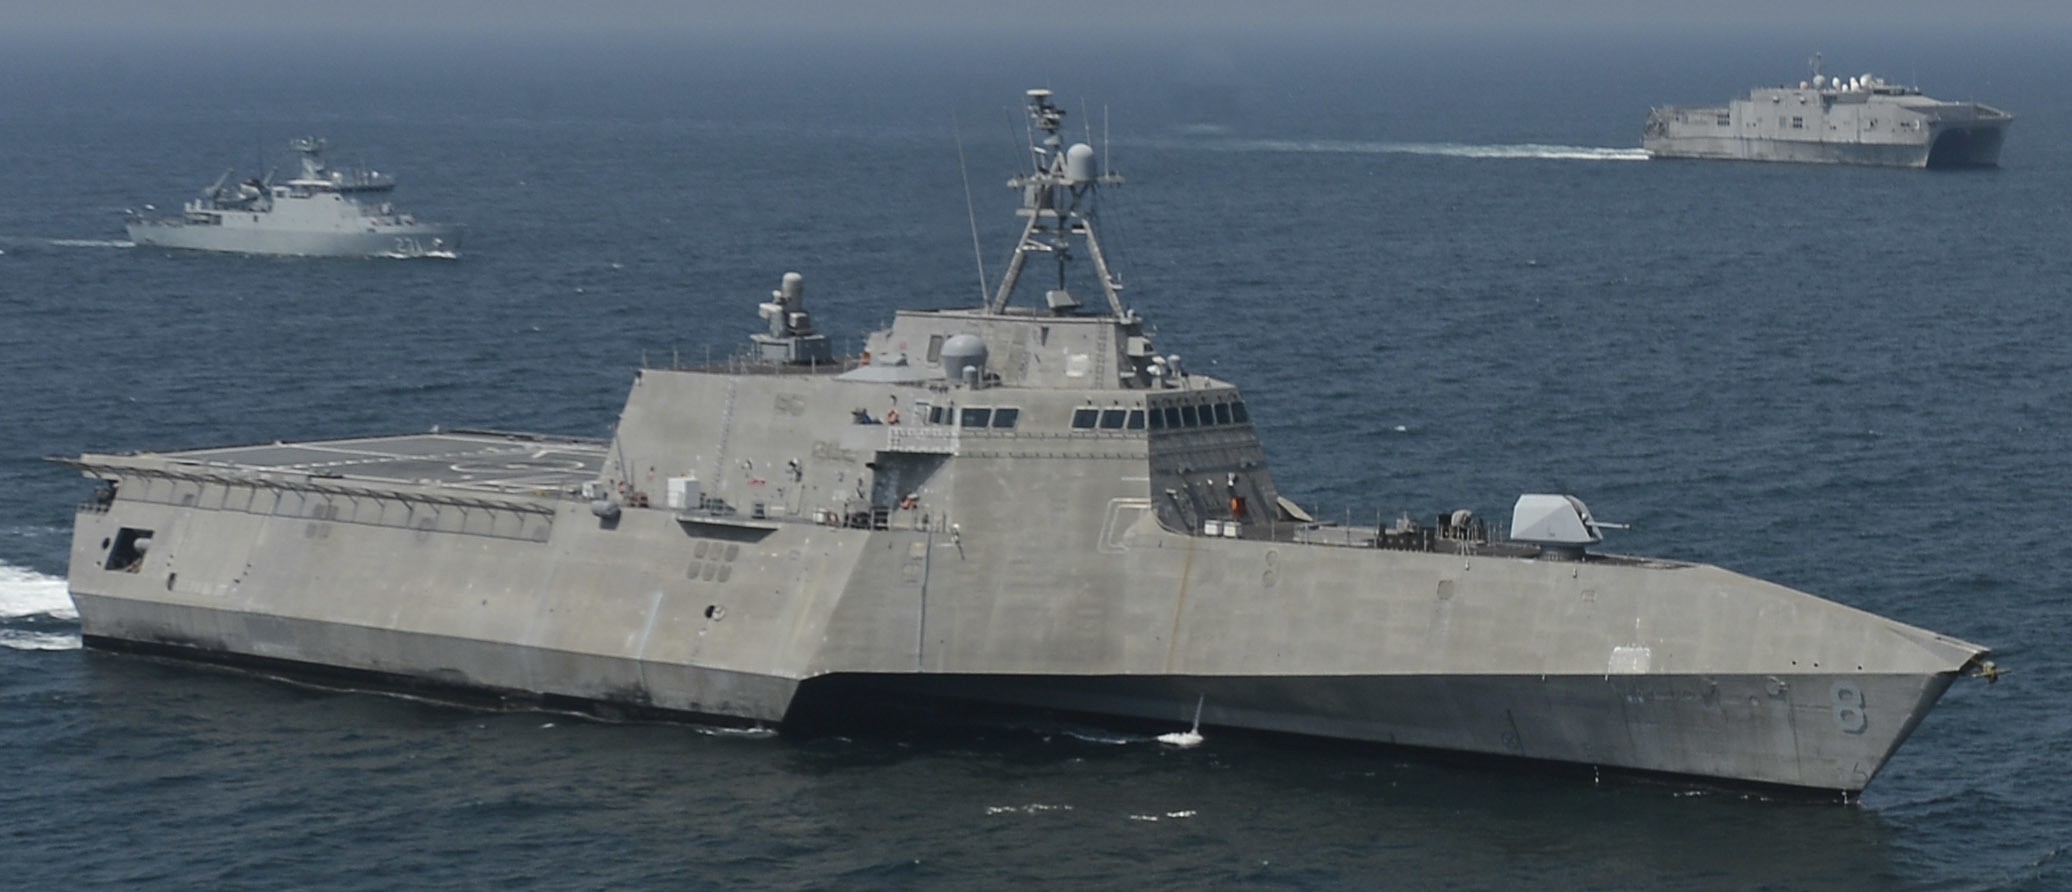 lcs-8 uss montgomery independence class littoral combat ship us navy 36 mta exercise